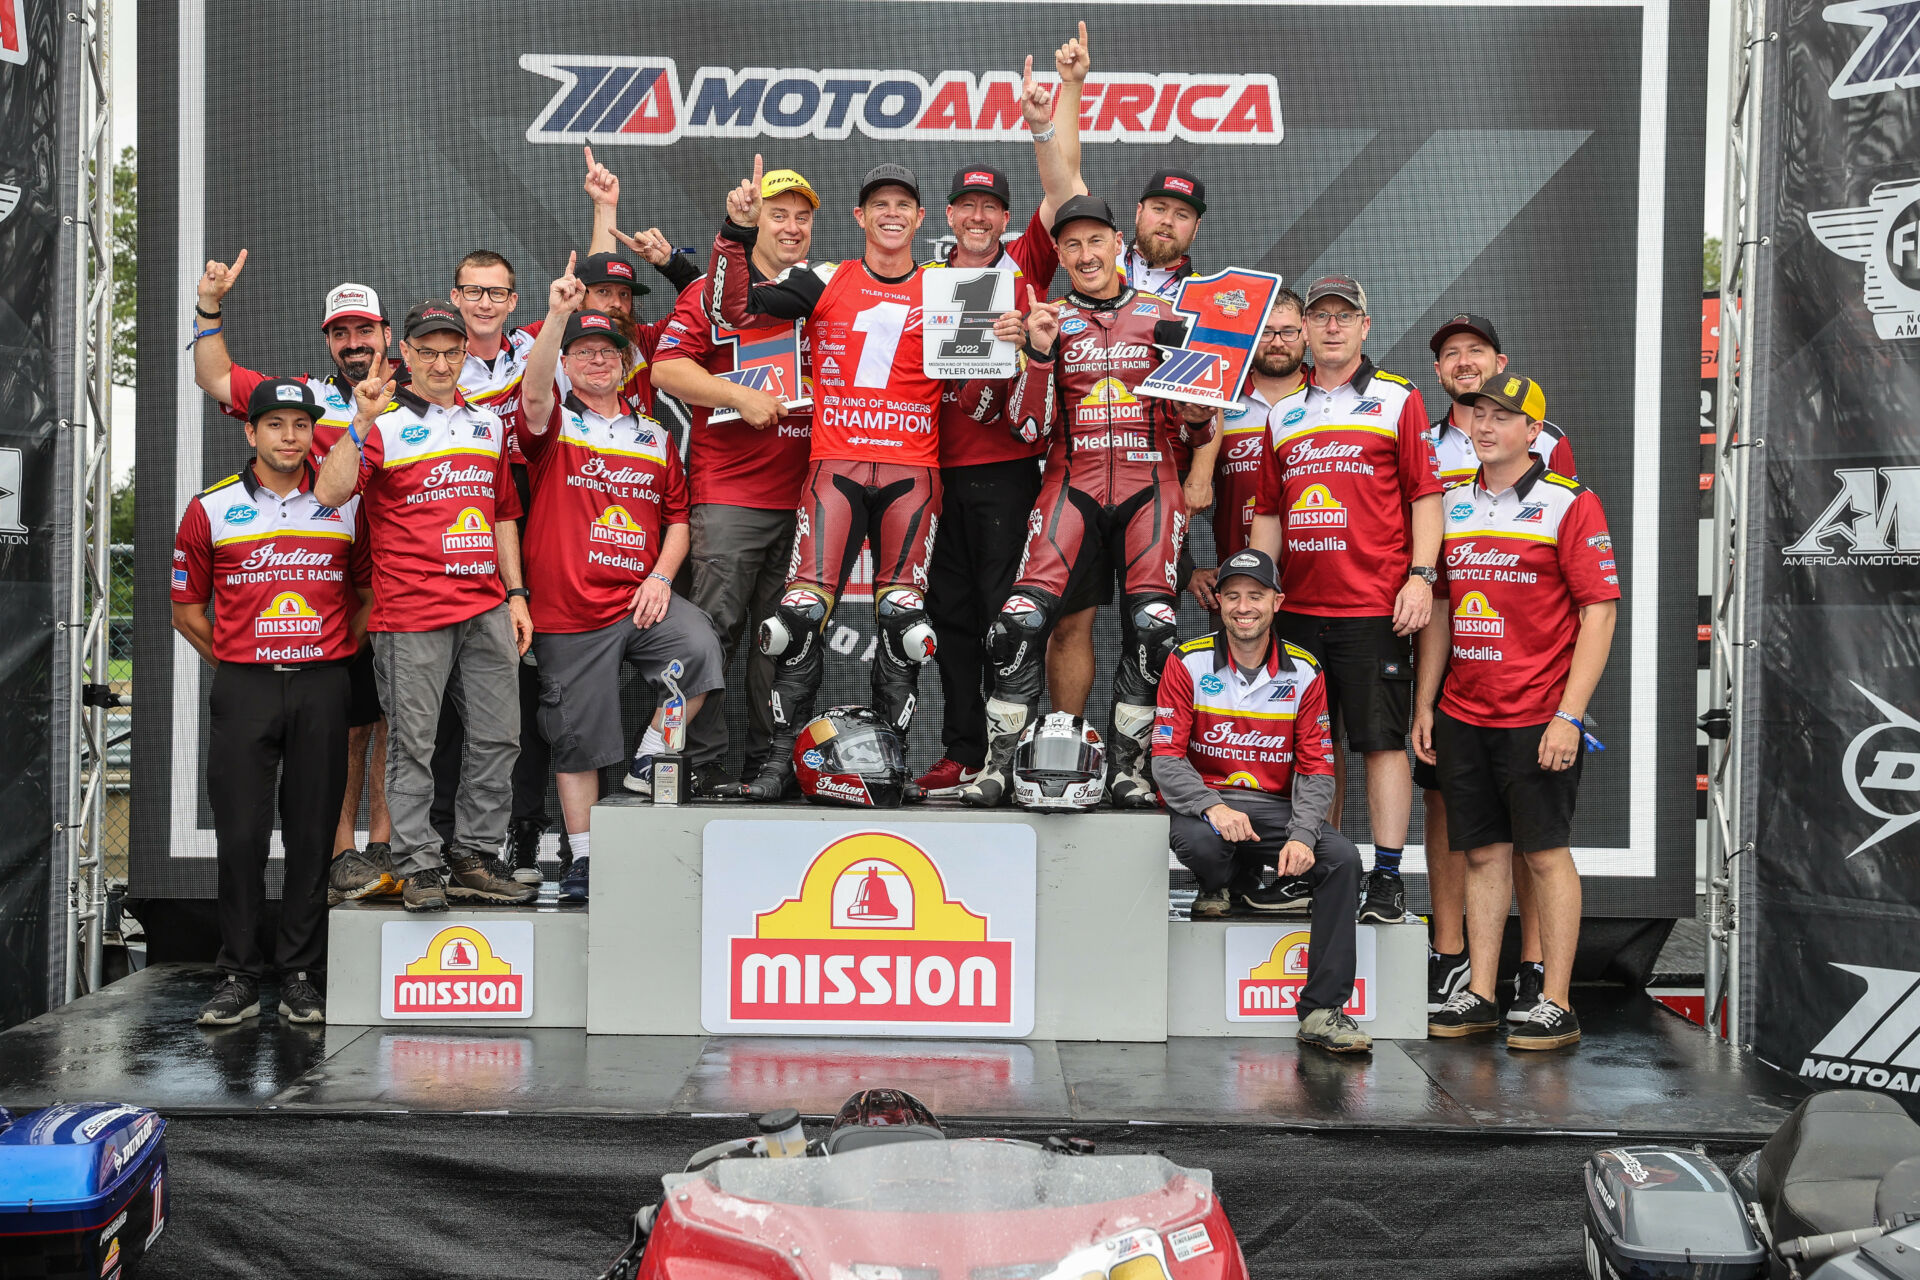 Tyler O'Hara holds up his new #1 plate and poses with teammate Jeremy McWilliams and the S&S Cycle team after winning the 2022 MotoAmerica King Of The Baggers Championship at New Jersey Motorsports Park. Indian Vice President Gary Gray is seen above the #1 plate. Photo by Brian J. Nelson.